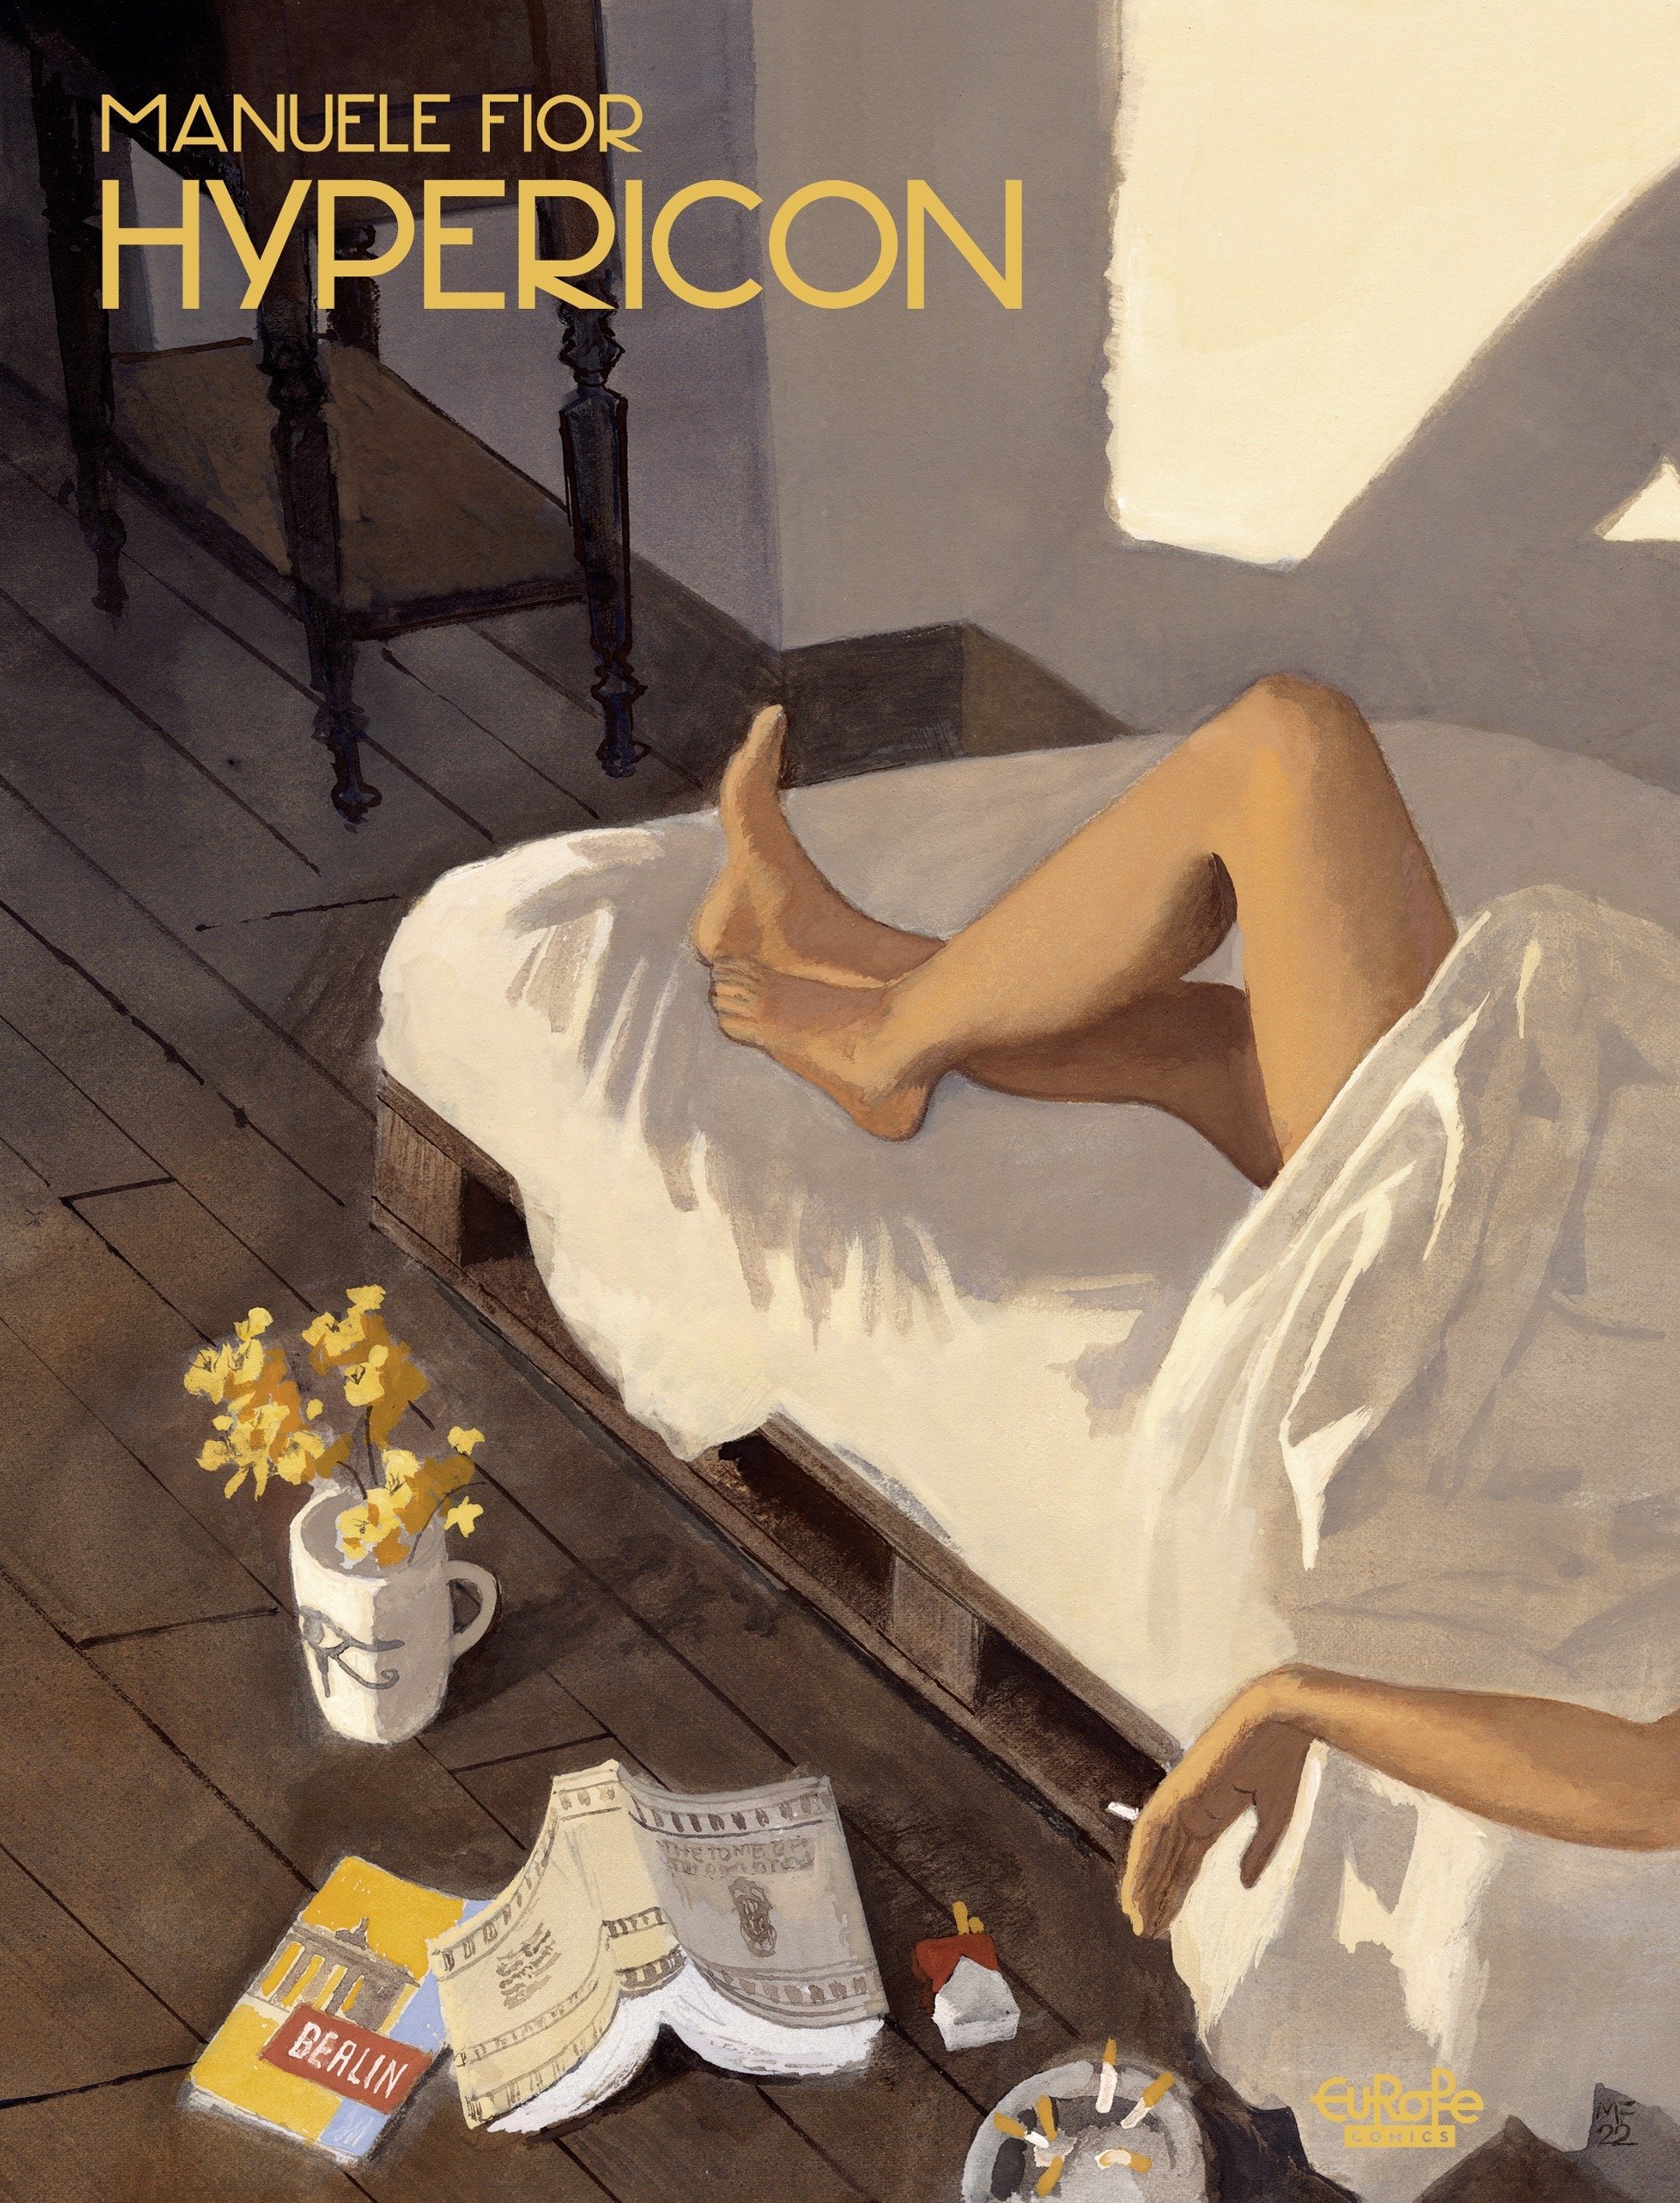 Read online Hypericon comic -  Issue # TPB - 1